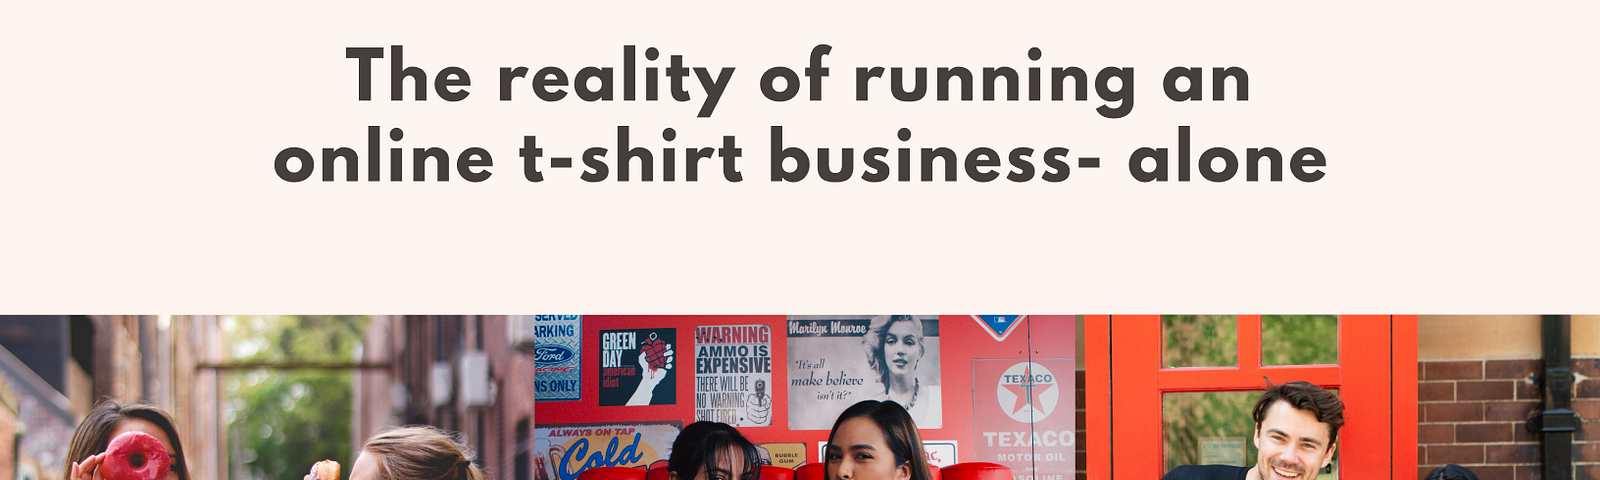 The reality of running an online t-shirt business- alone